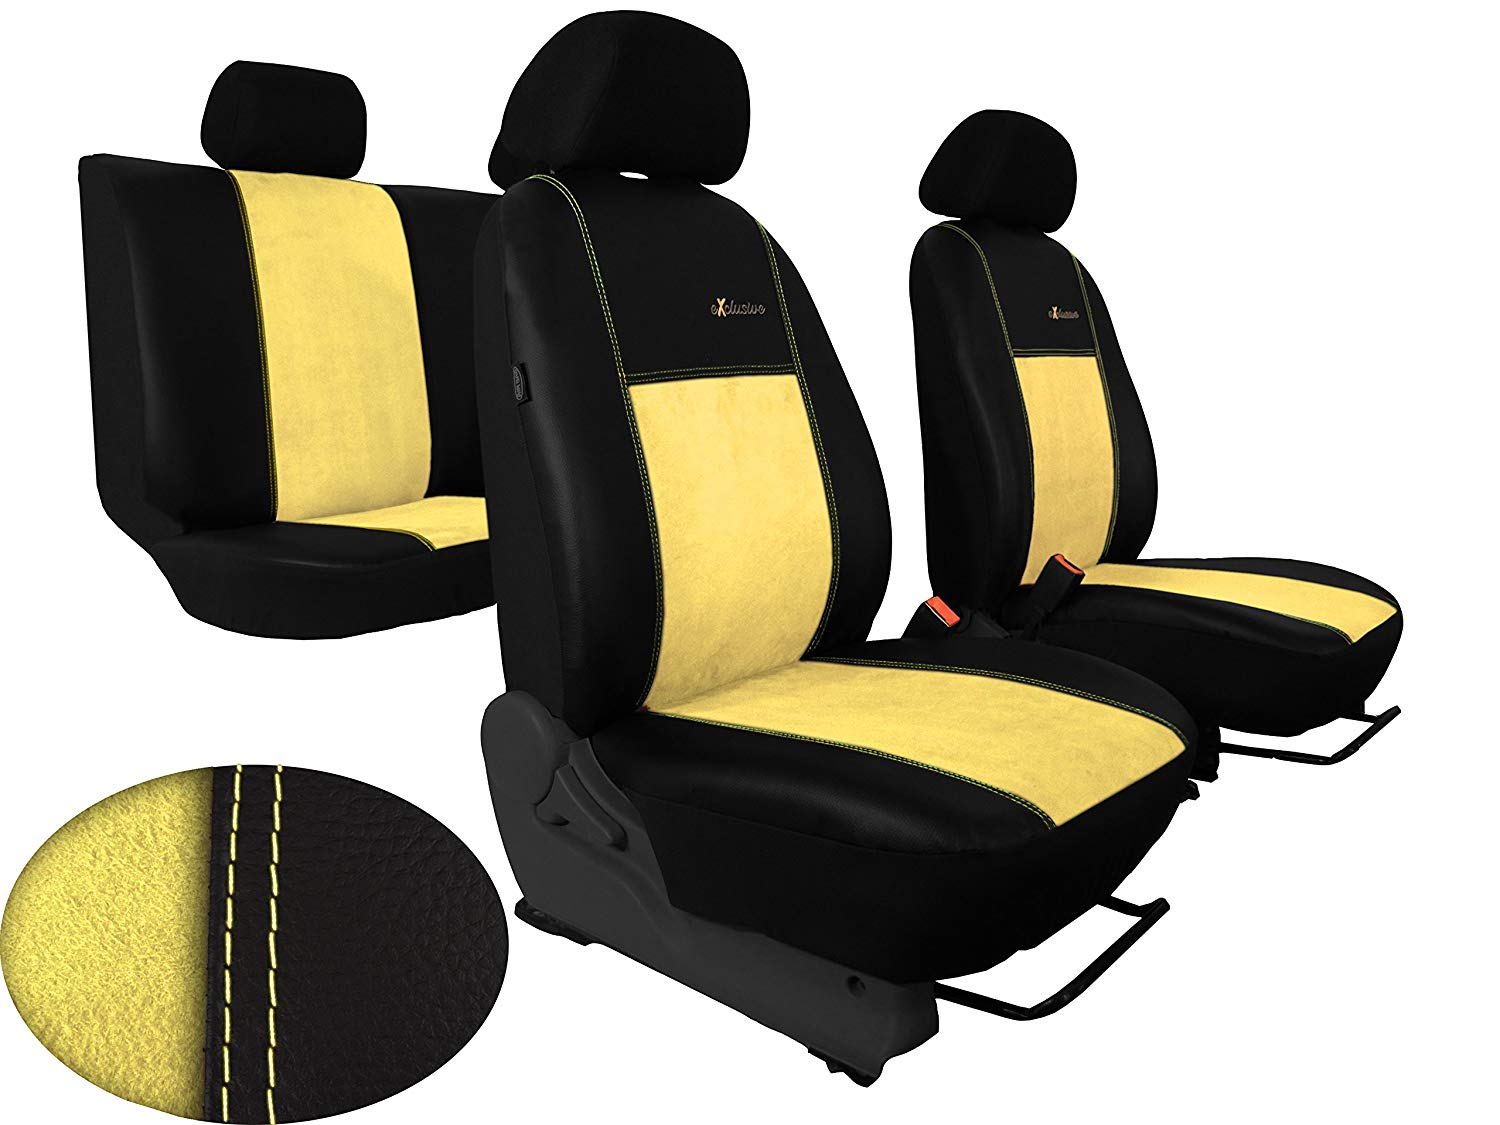 Alkantra Pok Ter Tuning Seat Covers for VW Golf 1